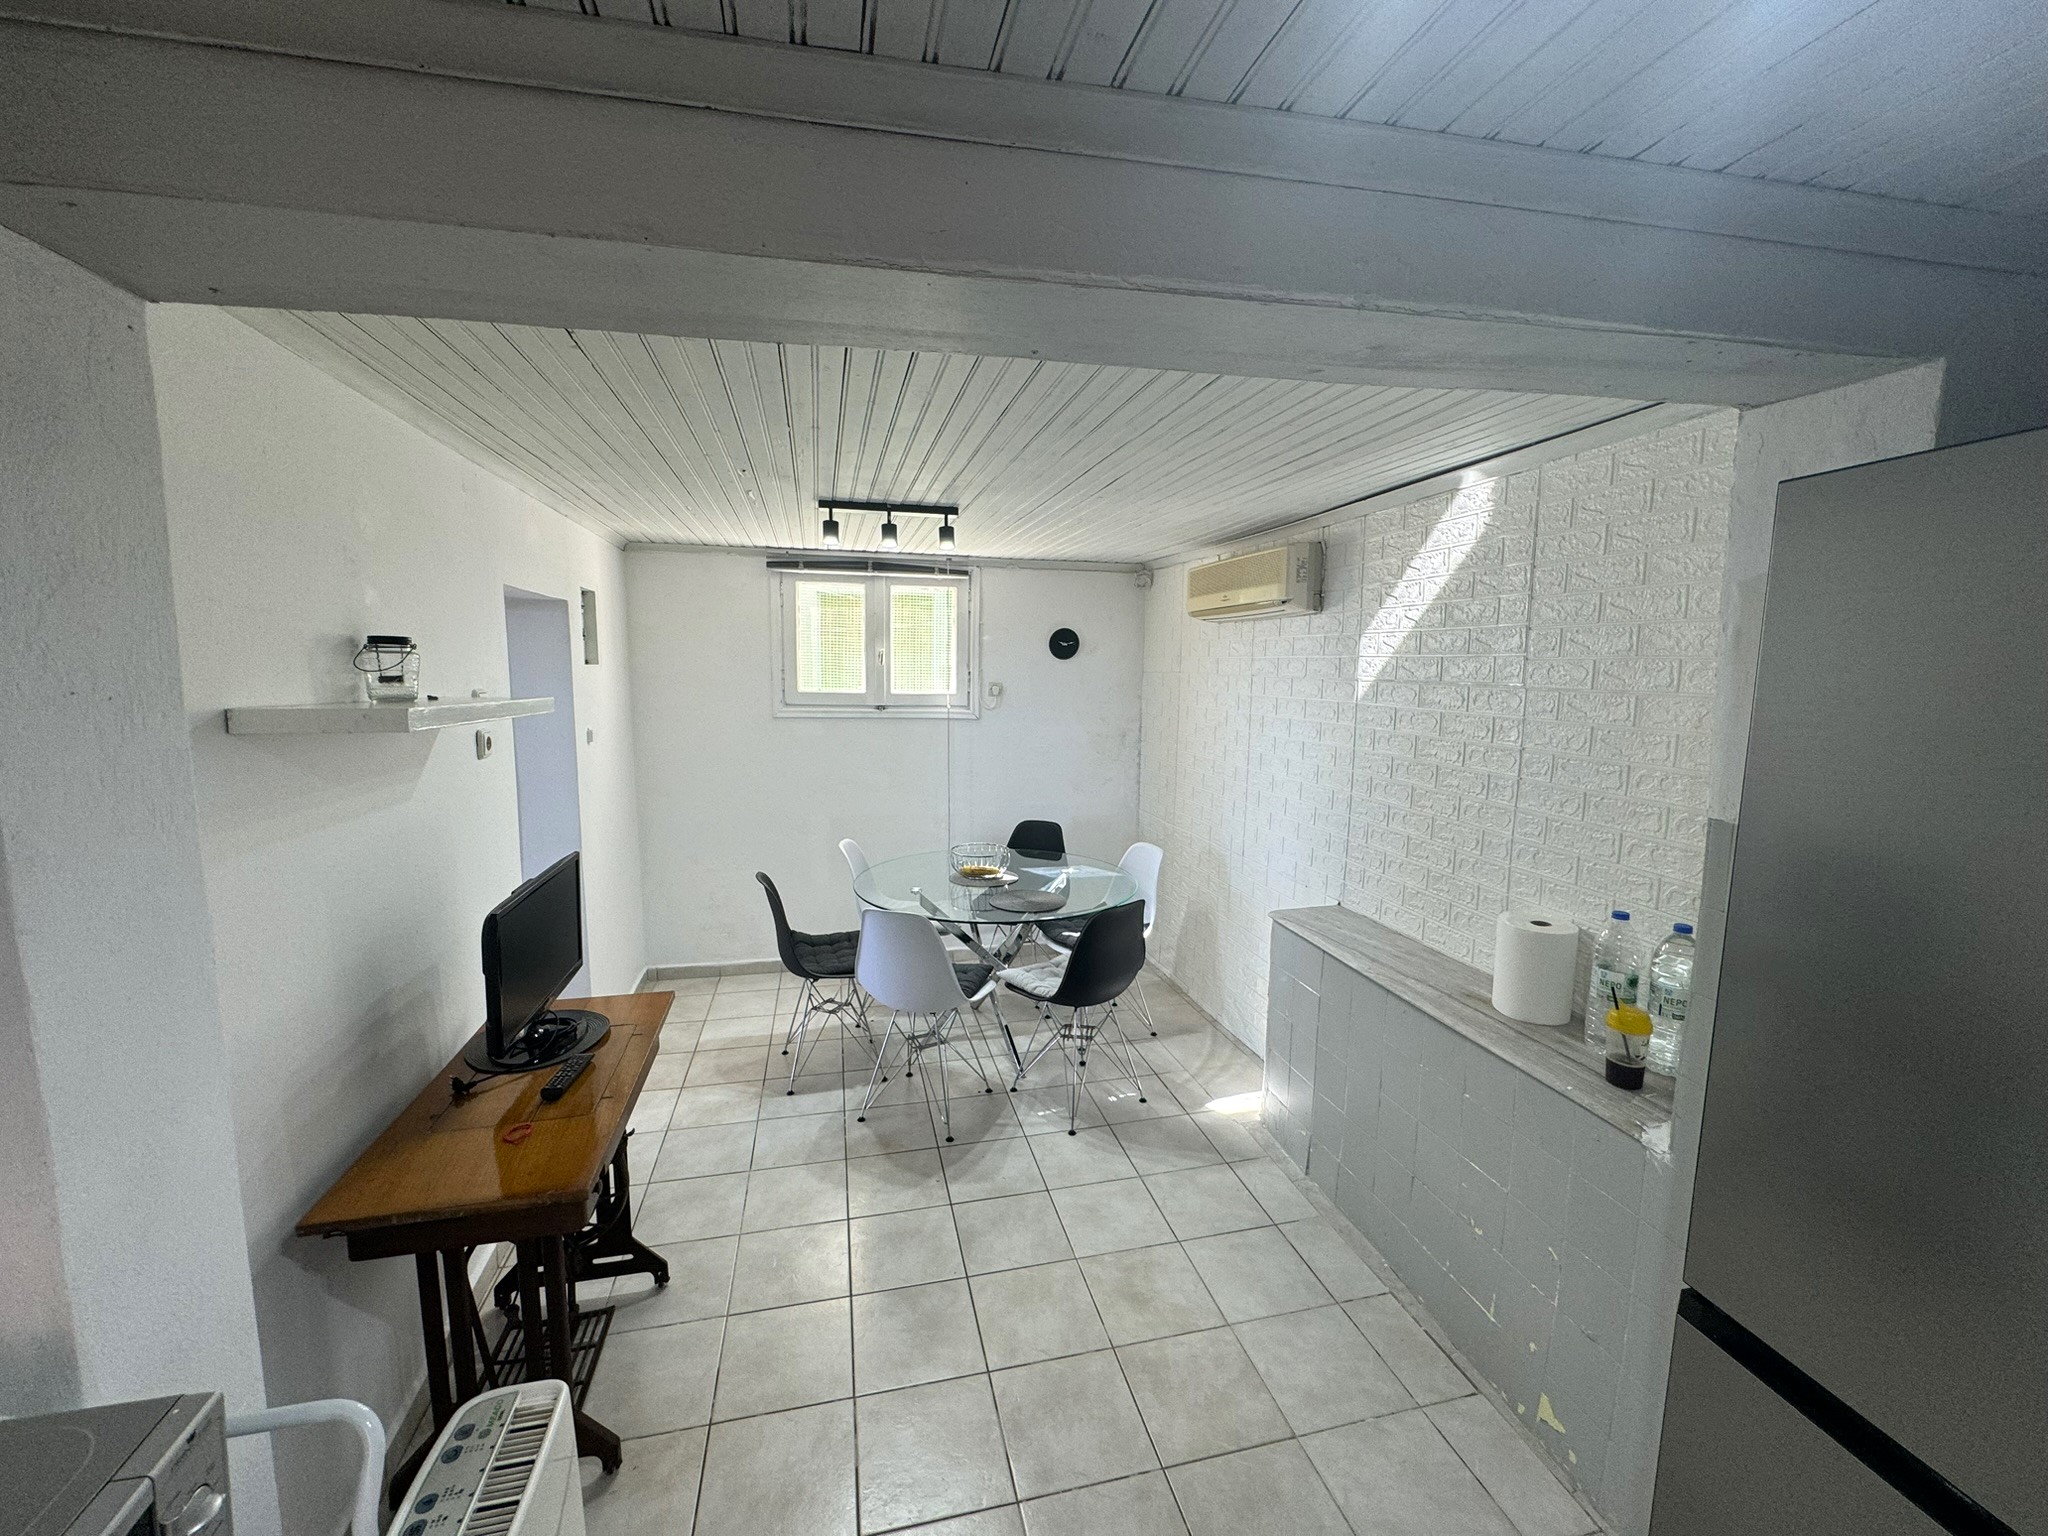 Kitchen of house for sale in Ithaca Greece Perachori